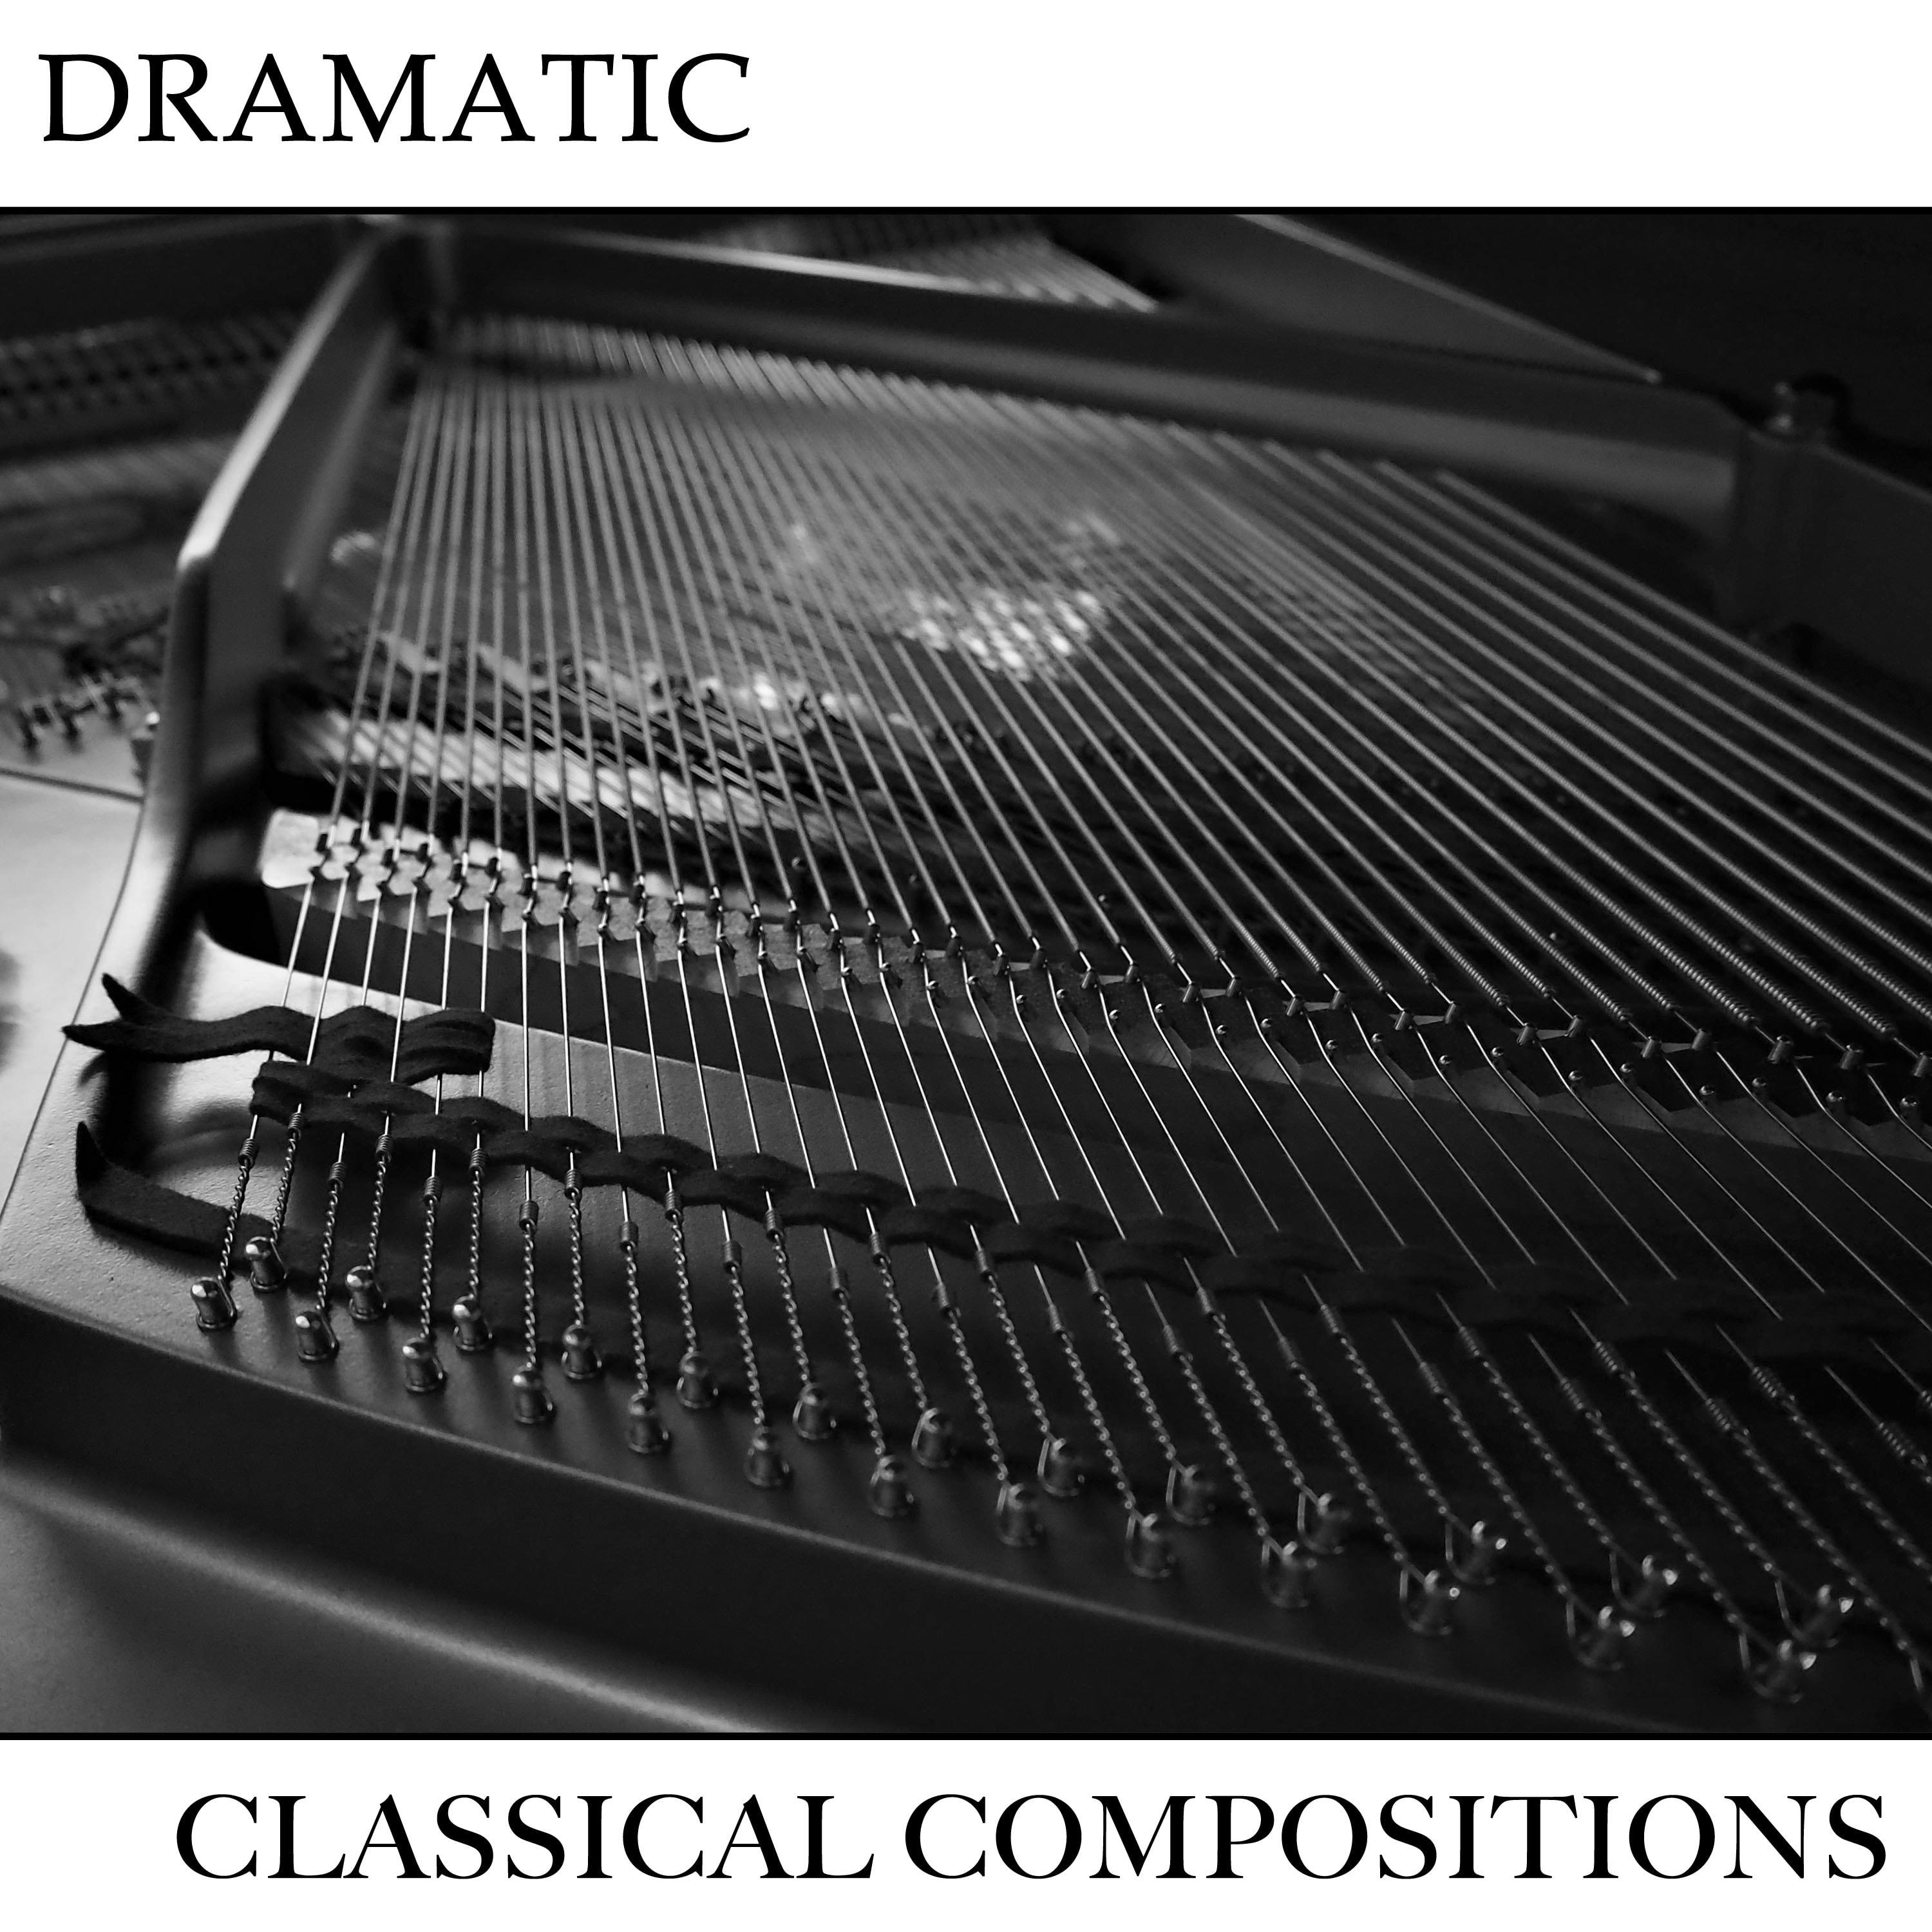 #19 Dramatic Classical Compositions